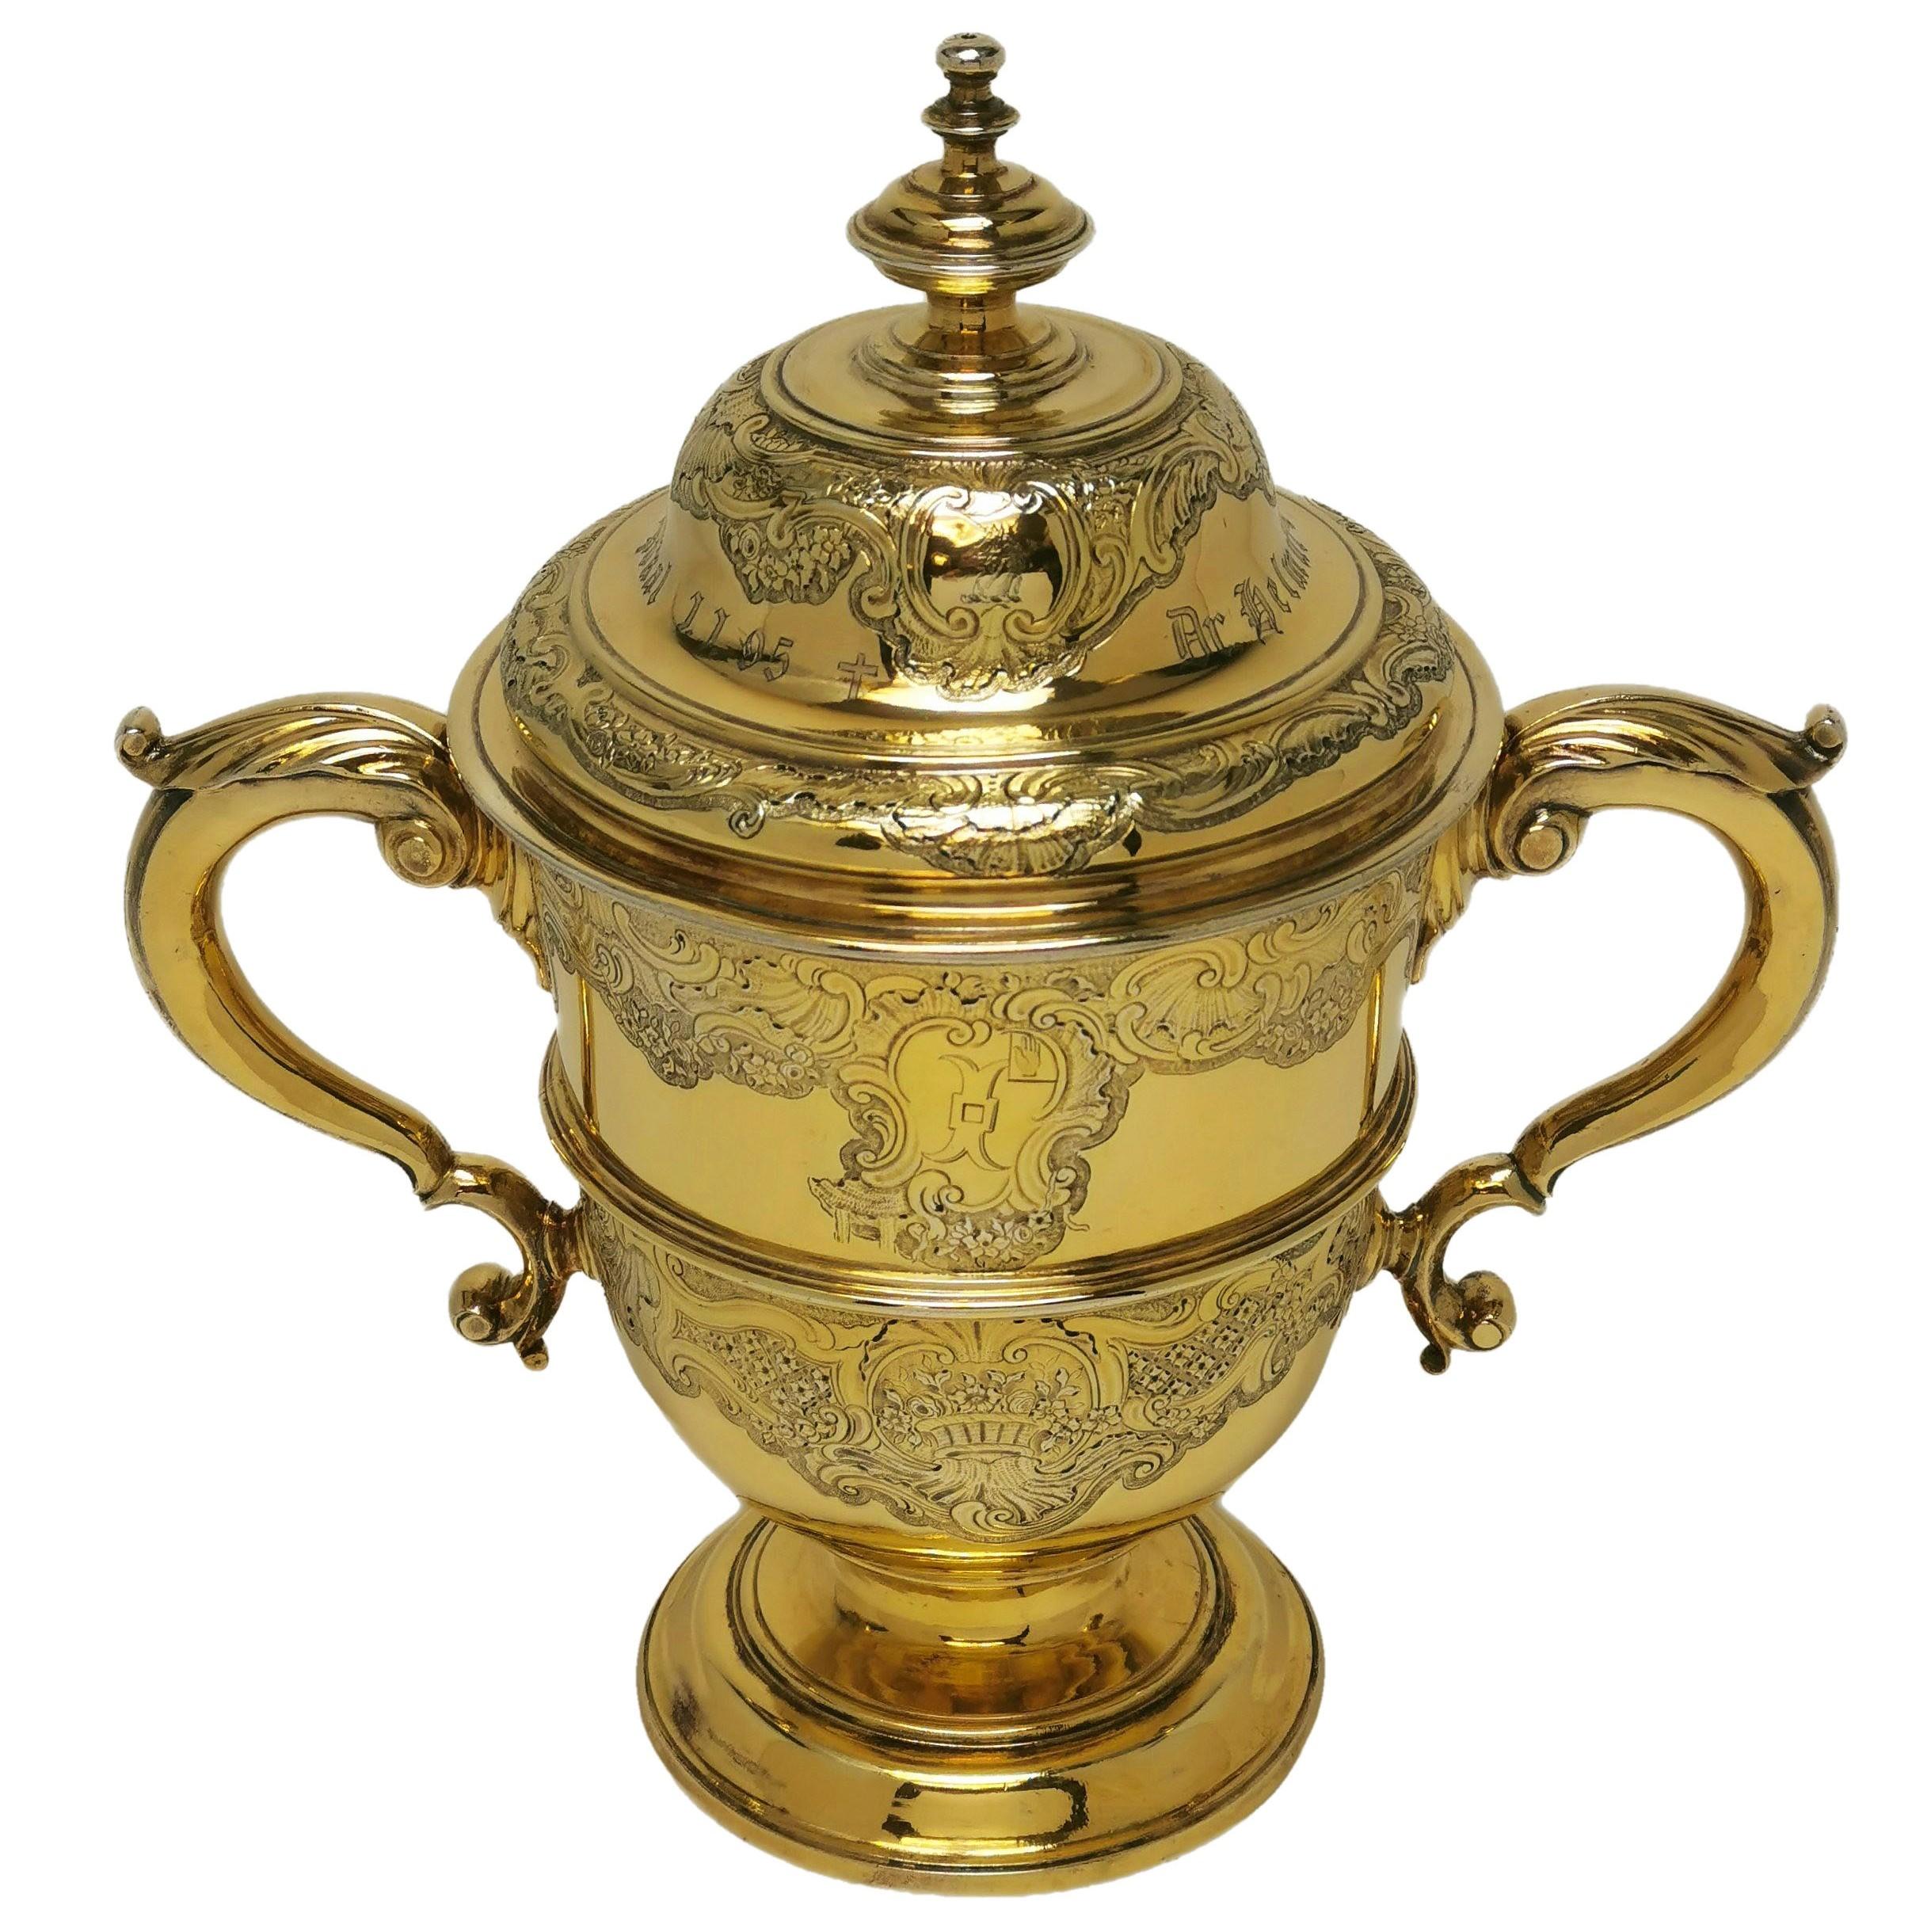 A beautiful Antique George II Silver Gilt Cup and Cover embellished with delicate, ornate Rococo style engravings on the body of the Cup and on the domed lid. The Body of the Cup has a cartouche on each side and each features an engraved crest. The